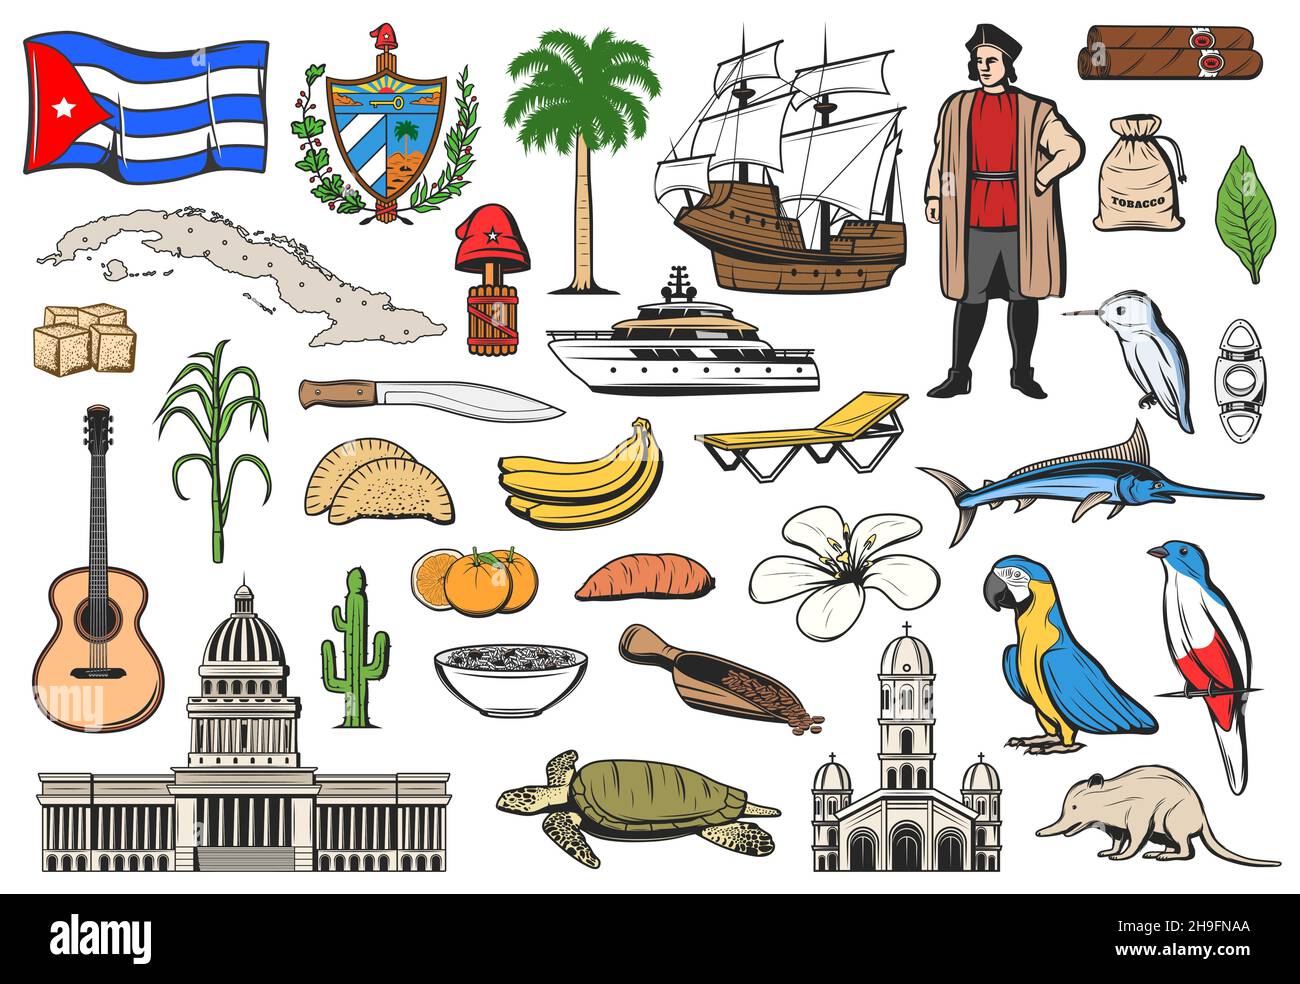 Cuba travel icons, Havana tourism landmarks and Caribbean attractions, vector. Cuba flag and map, beach resort, sightseeing and attractions symbols of Stock Vector